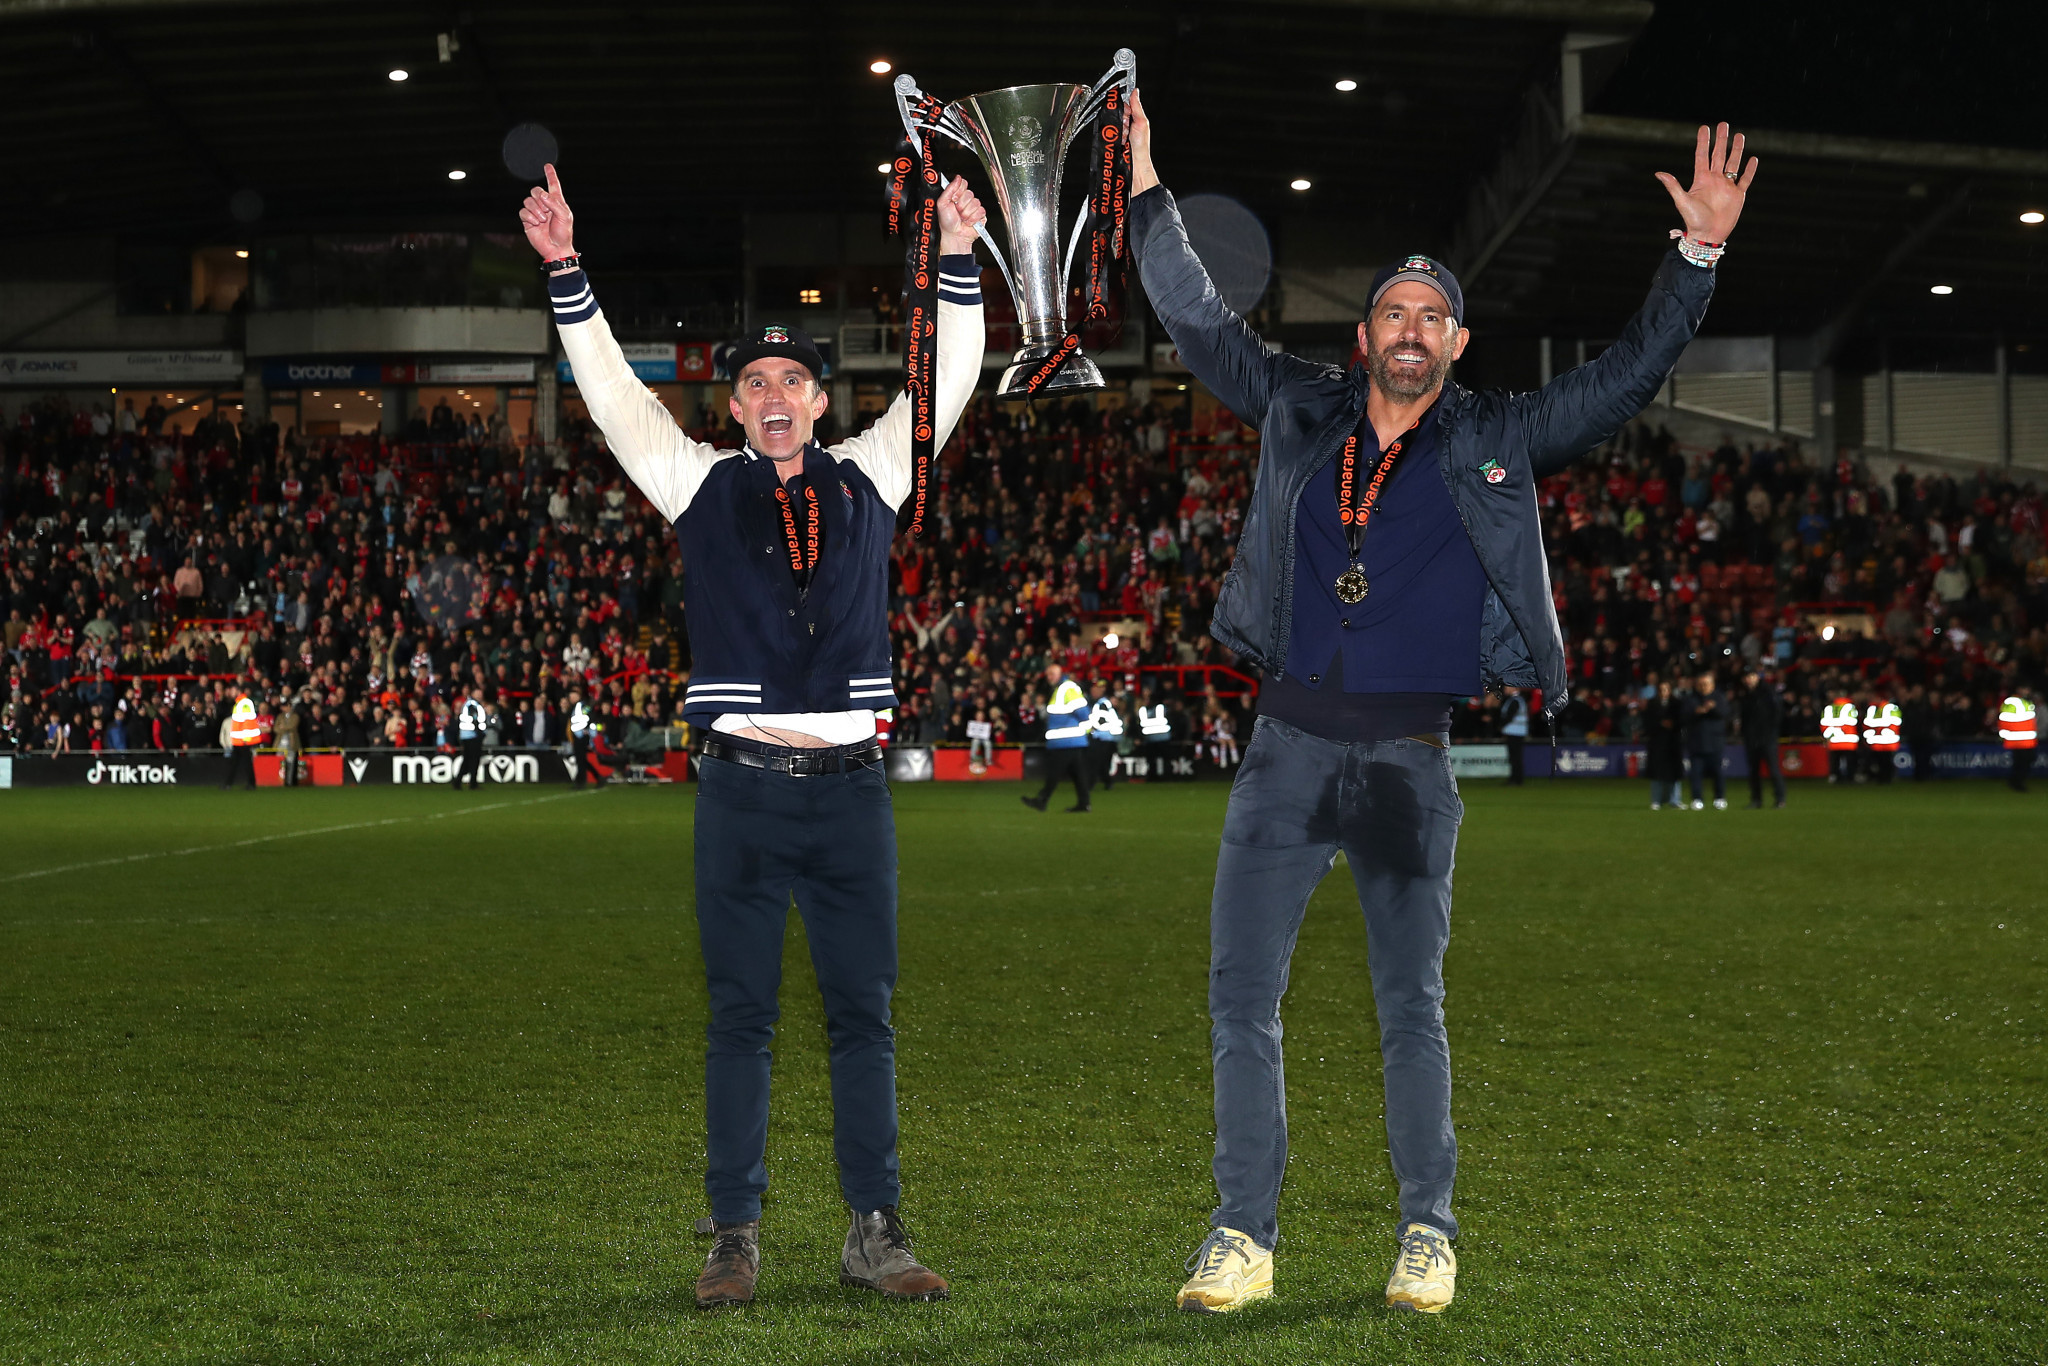 Wrexham AFC owners Rob McElhenney, left, and Ryan Reynolds have transformed the club and in turn the city ©Getty Images